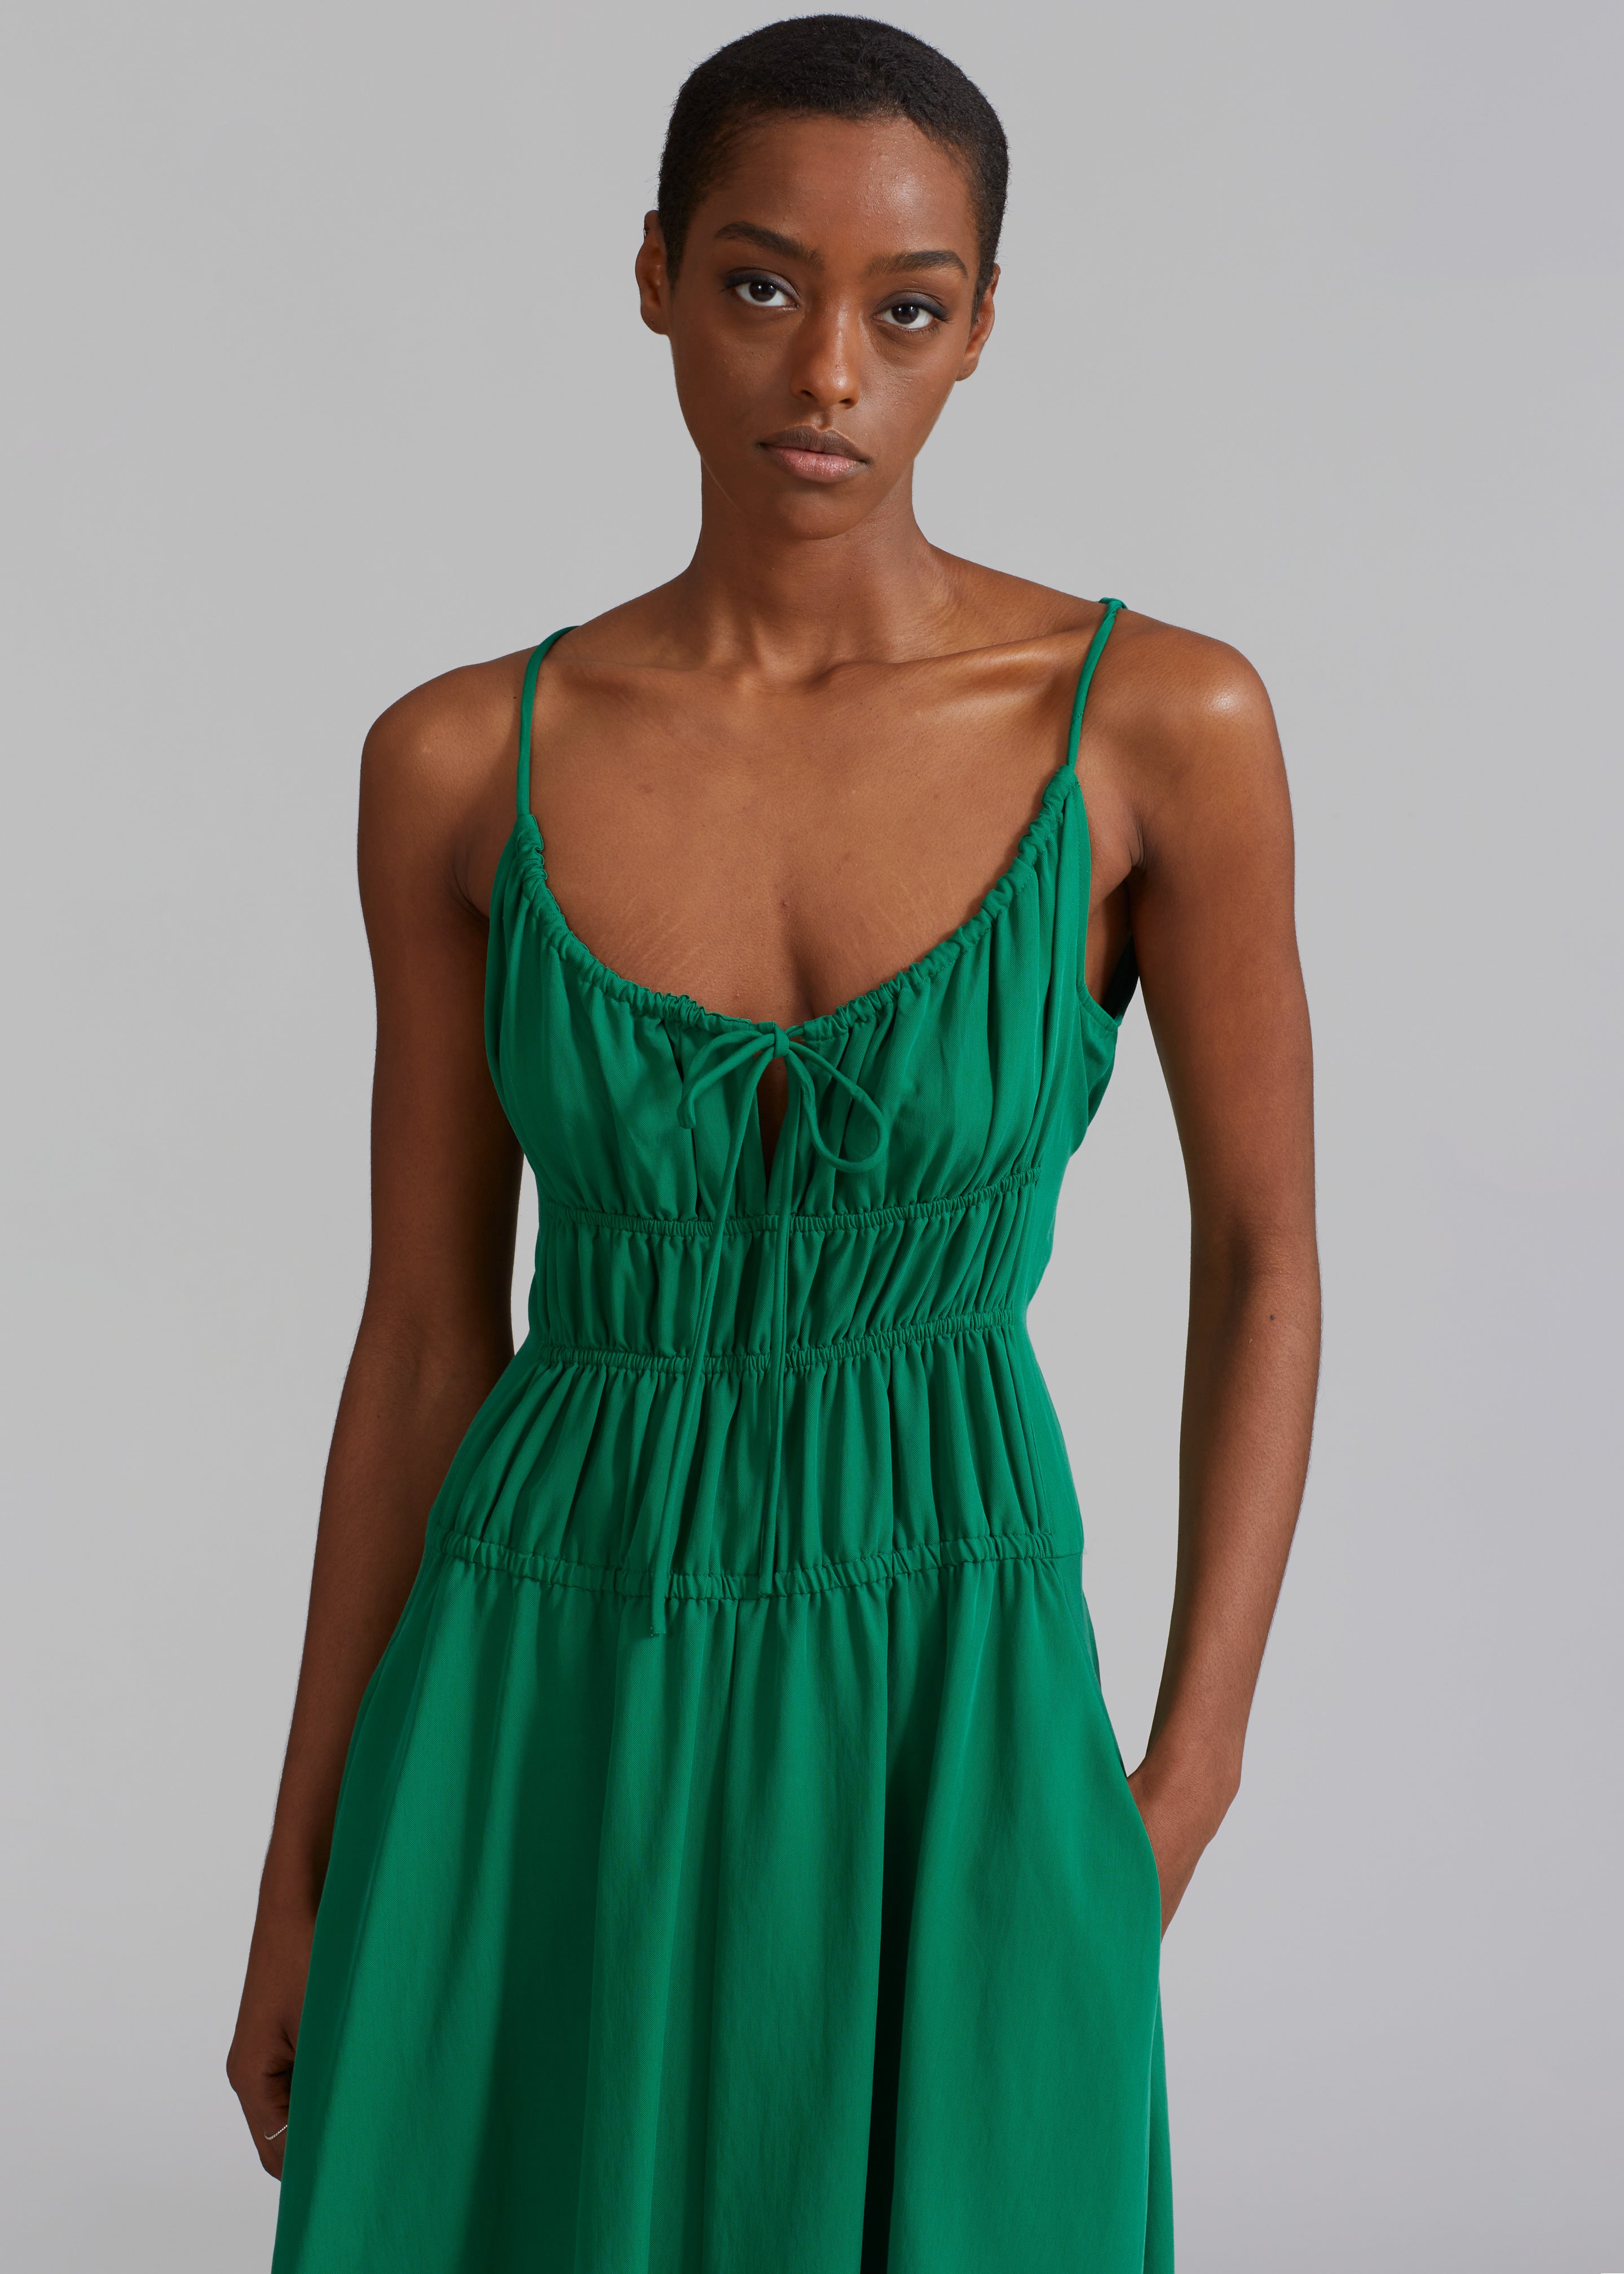 Proenza Schouler White Label Drapey Suiting Ruched Dress - Green - 2